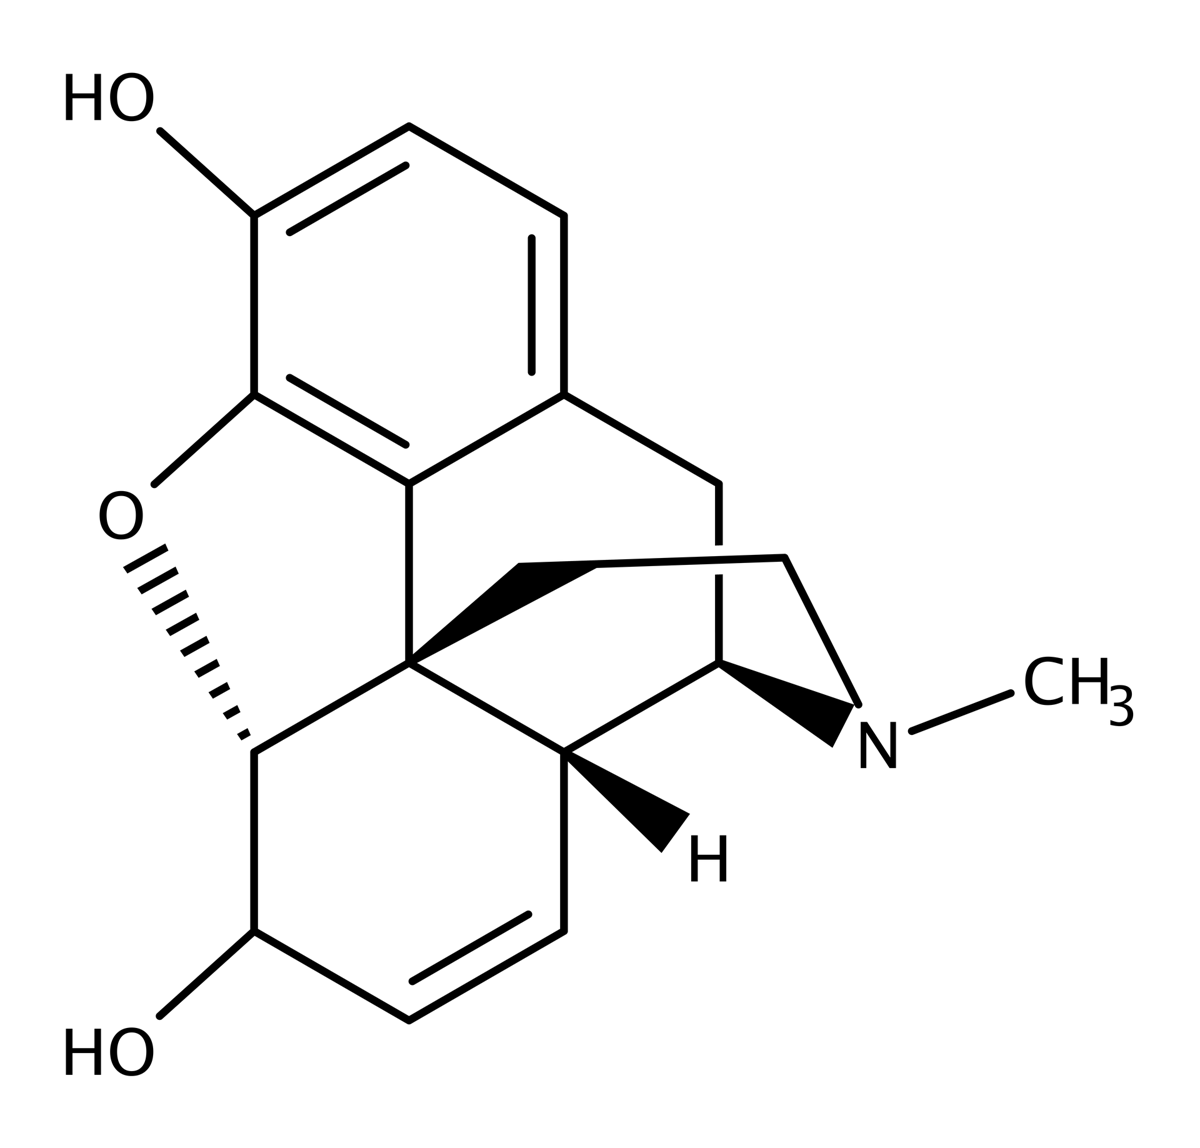 Chemical Morphine Image By Isizawa From Pixabay